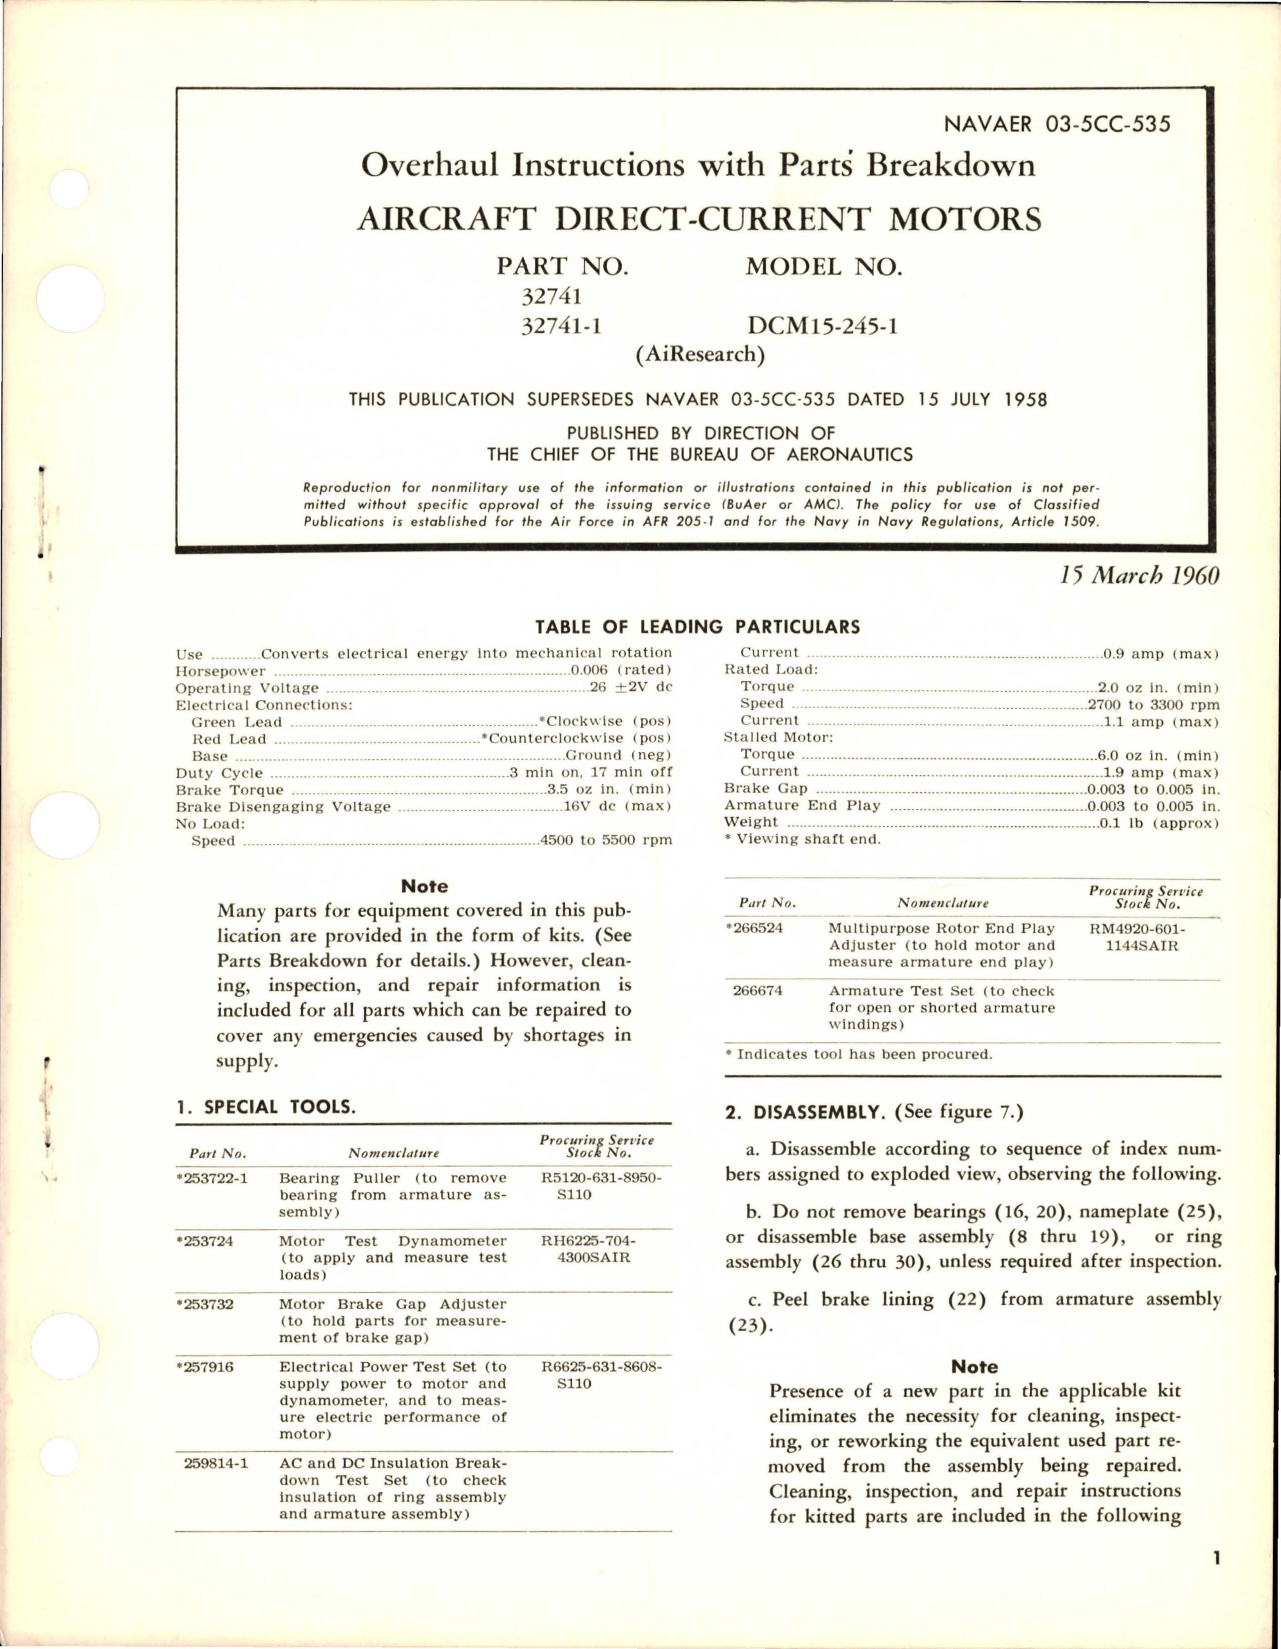 Sample page 1 from AirCorps Library document: Overhaul Instructions with Parts Breakdown for Direct Current Motor - Parts 32741 and 32741-1